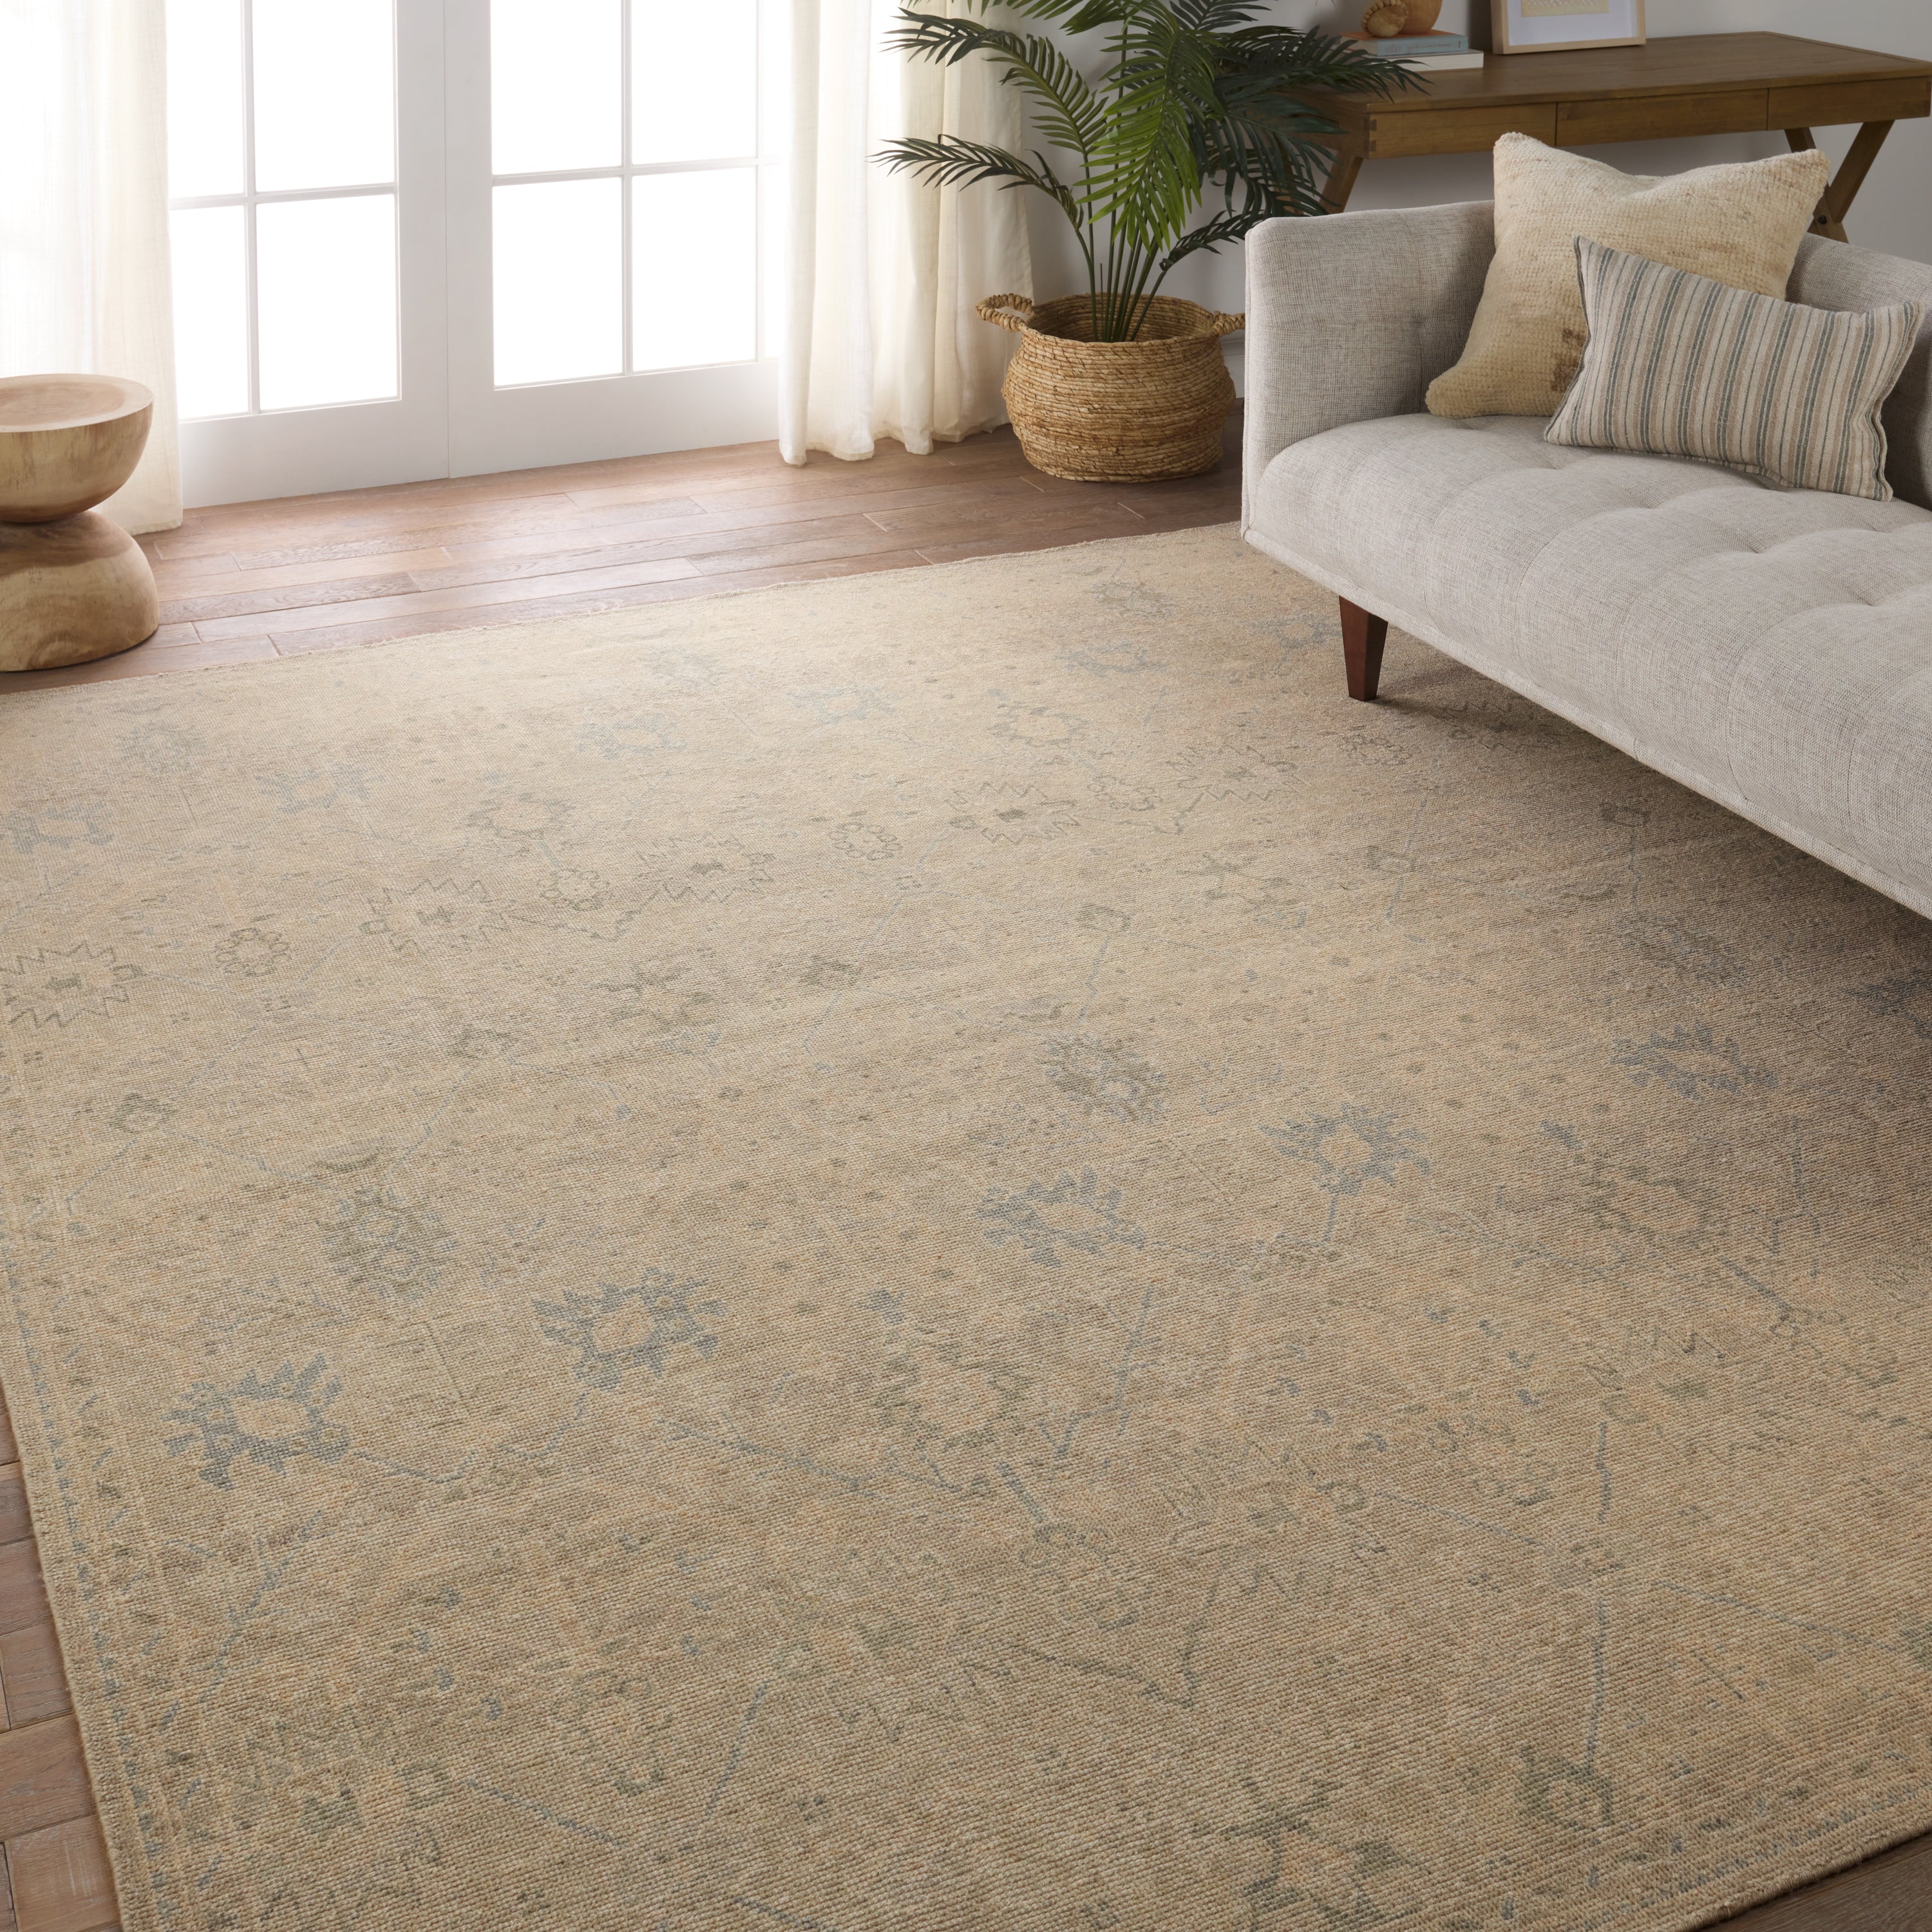 The Onessa collection marries traditional motifs with soft, subdued colorways for the perfect blend of fresh and time-honored style. These hand-knotted wool rugs feature a hand-sheared quality that lends the design a coveted vintage impression. The Joan rug features a distressed, floral Oushak pattern in hues of tan, blue, taupe, cream, and gray. Amethyst Home provides interior design, new construction, custom furniture, and area rugs in the Boston metro area.